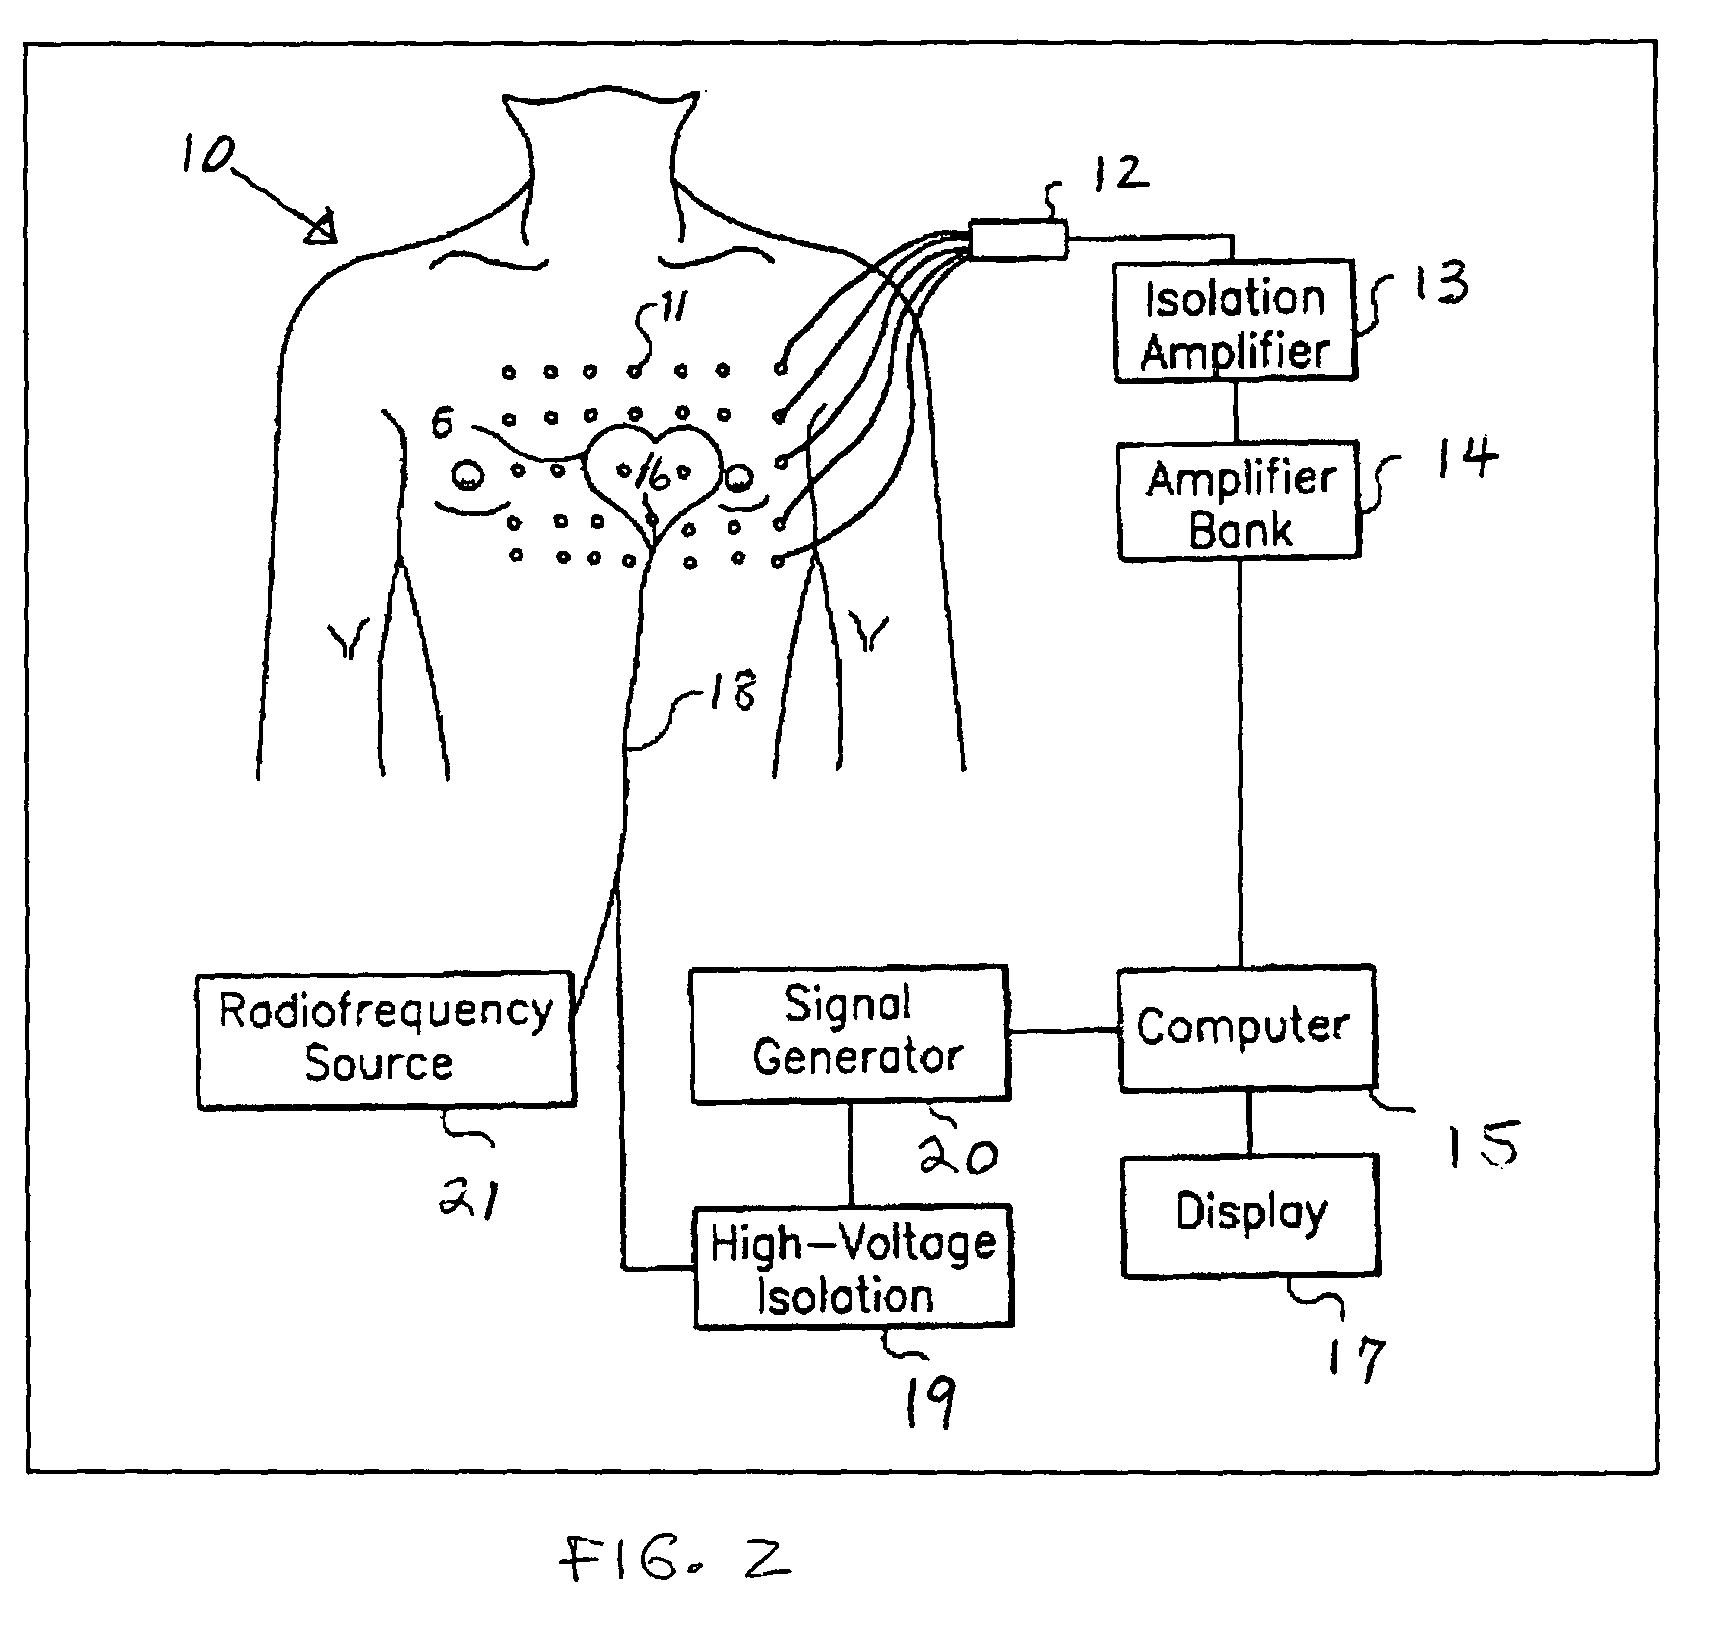 Method and apparatus for the guided ablative therapy of fast ventricular arrhythmia